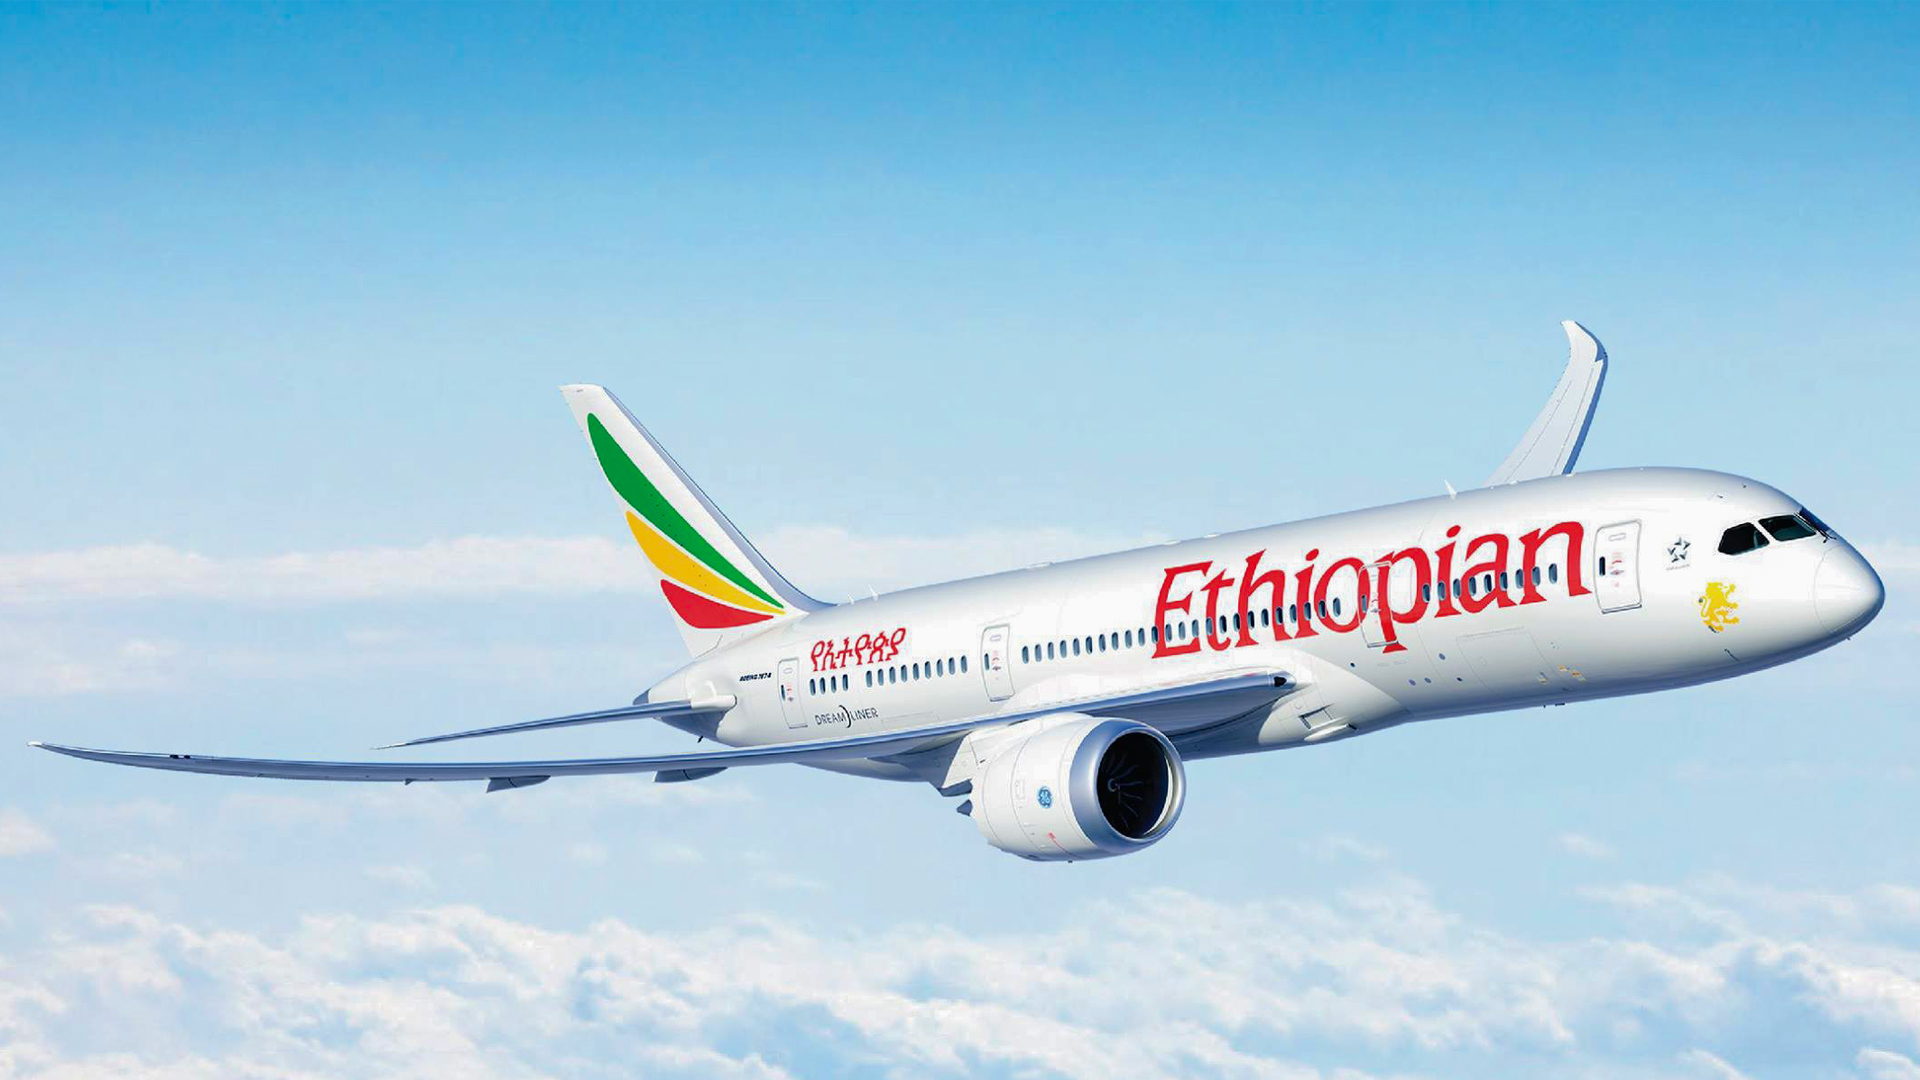 Ethiopian Airlines has resumed ticketing services for all travel agents in Malawi